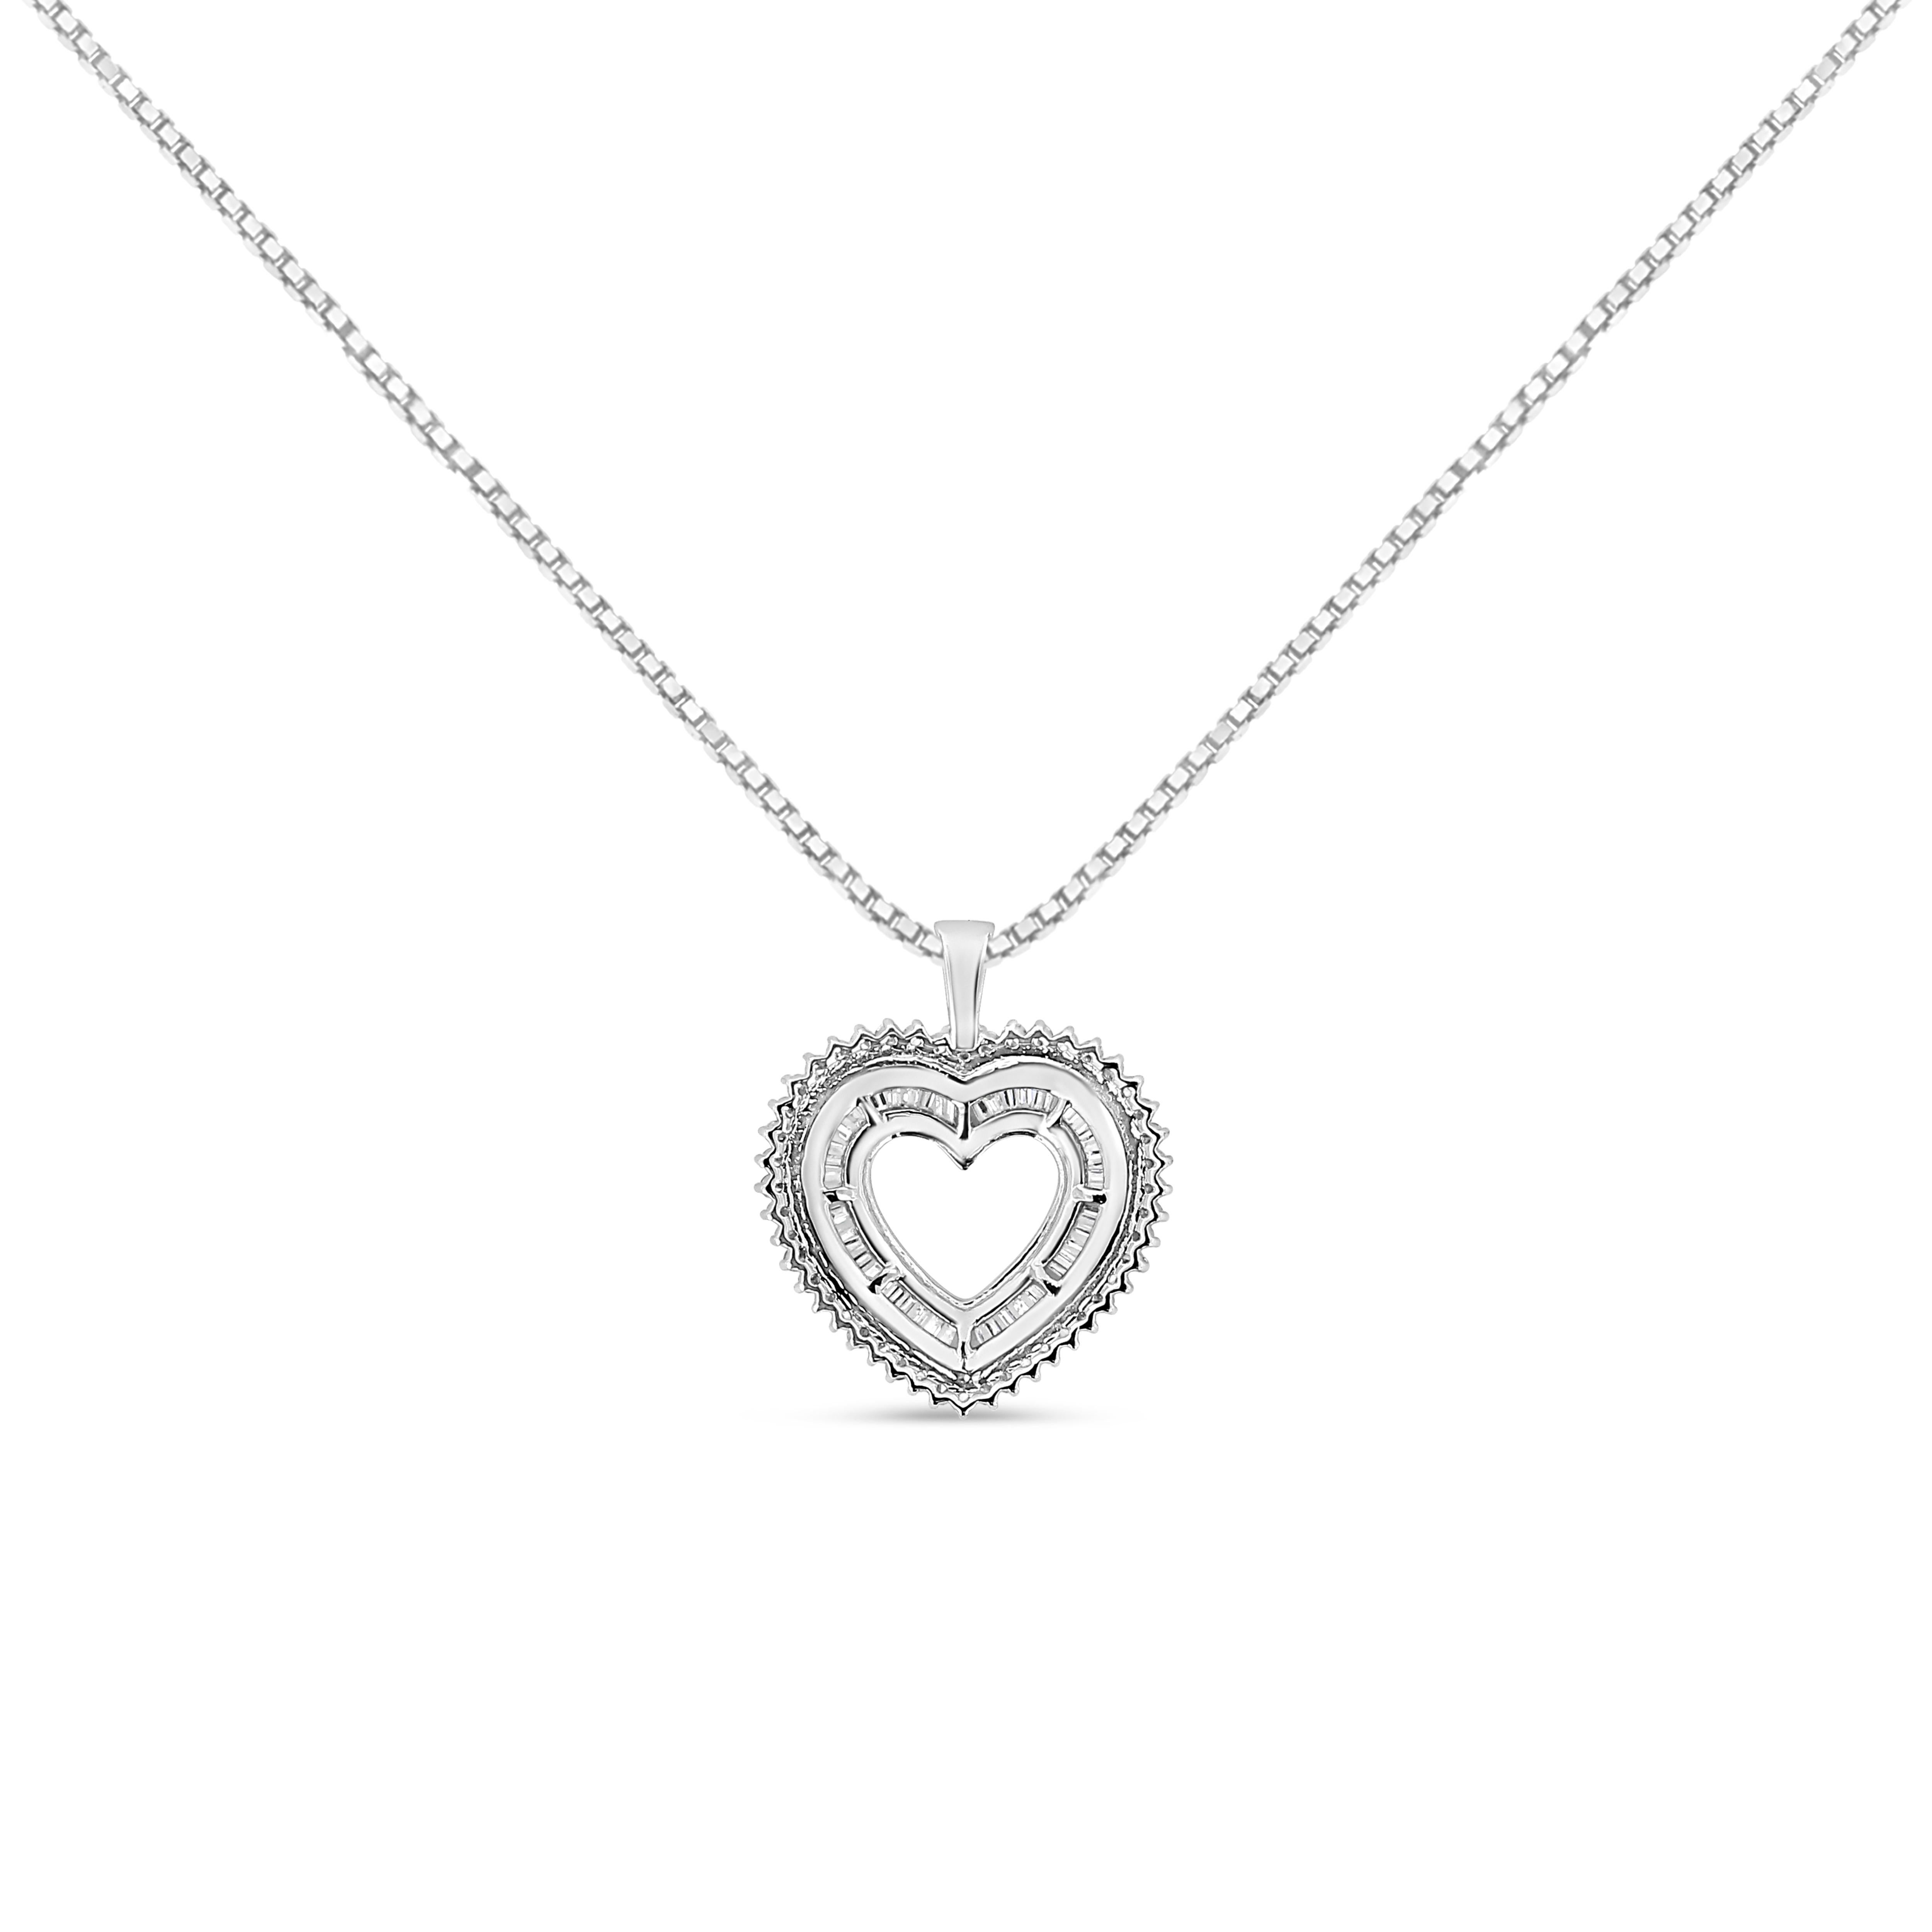 Surprise the one you love the most with this stunning diamond heart pendant. Fashioned from cool weaves of genuine sterling silver, this marvelous style showcases a heart-shaped outline shimmering with tapered baguette-cut diamonds between polished